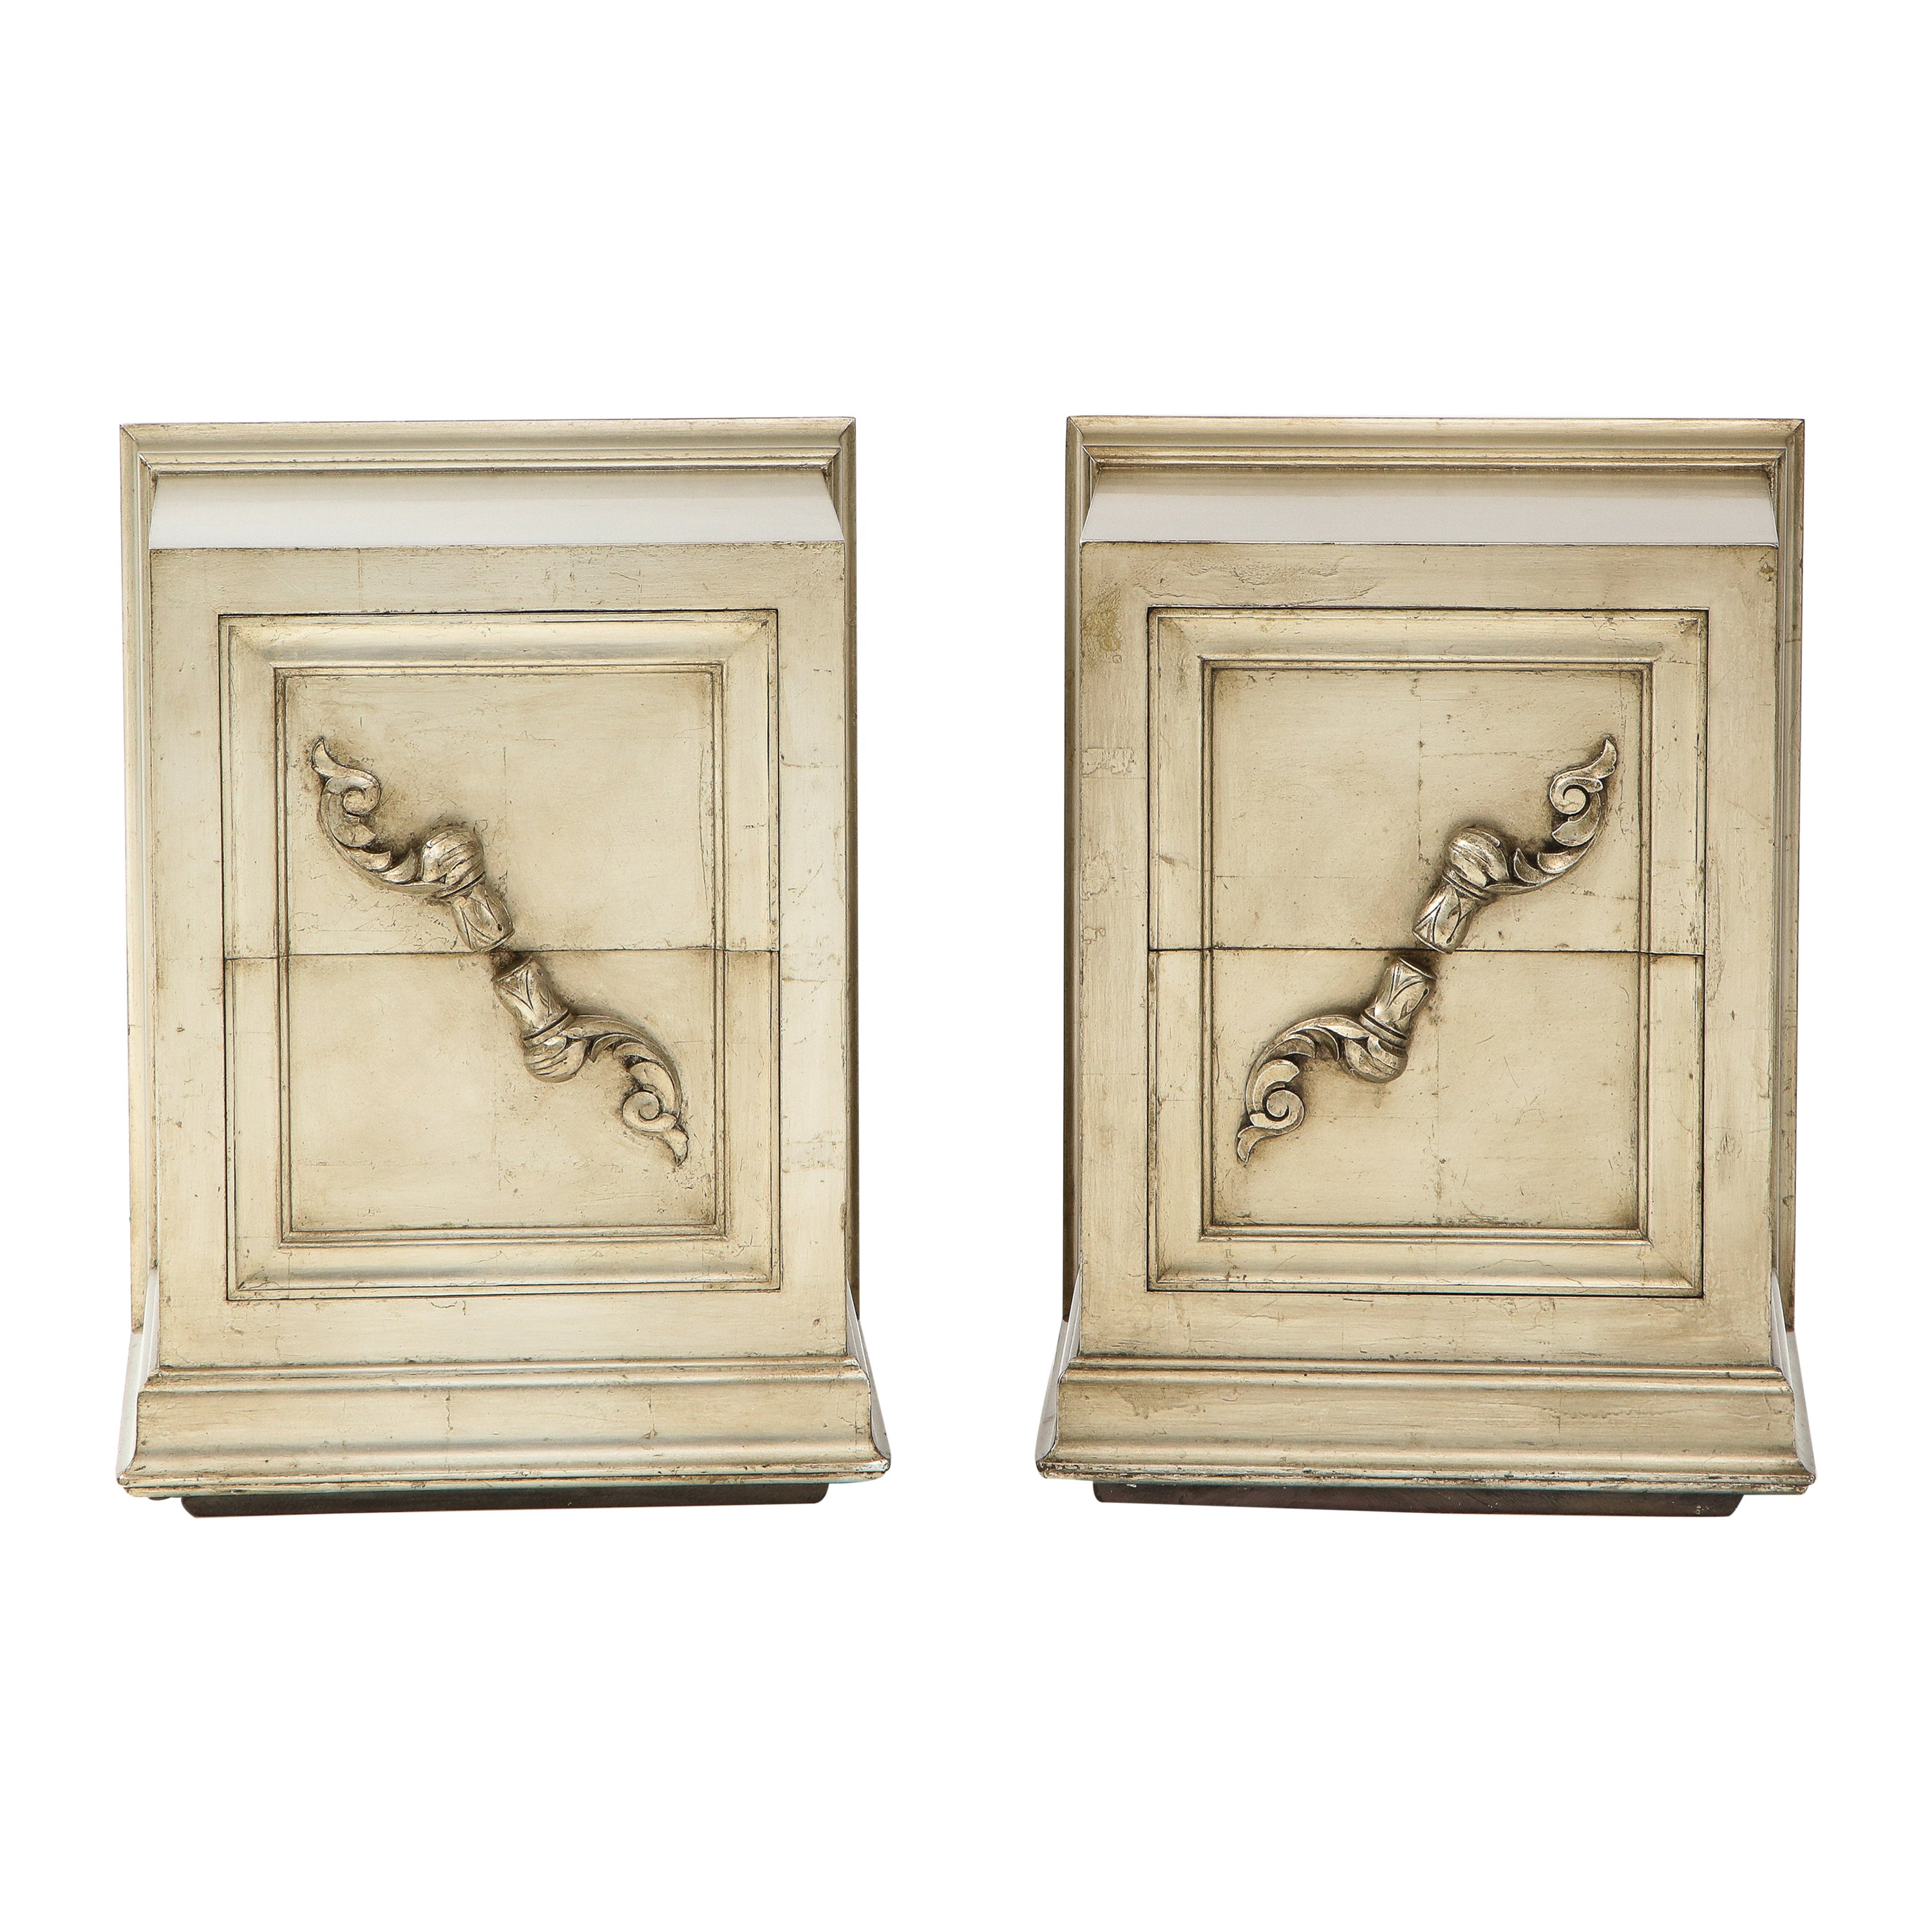 Spectacular Pair of Rare James Mont Scroll Cabinets